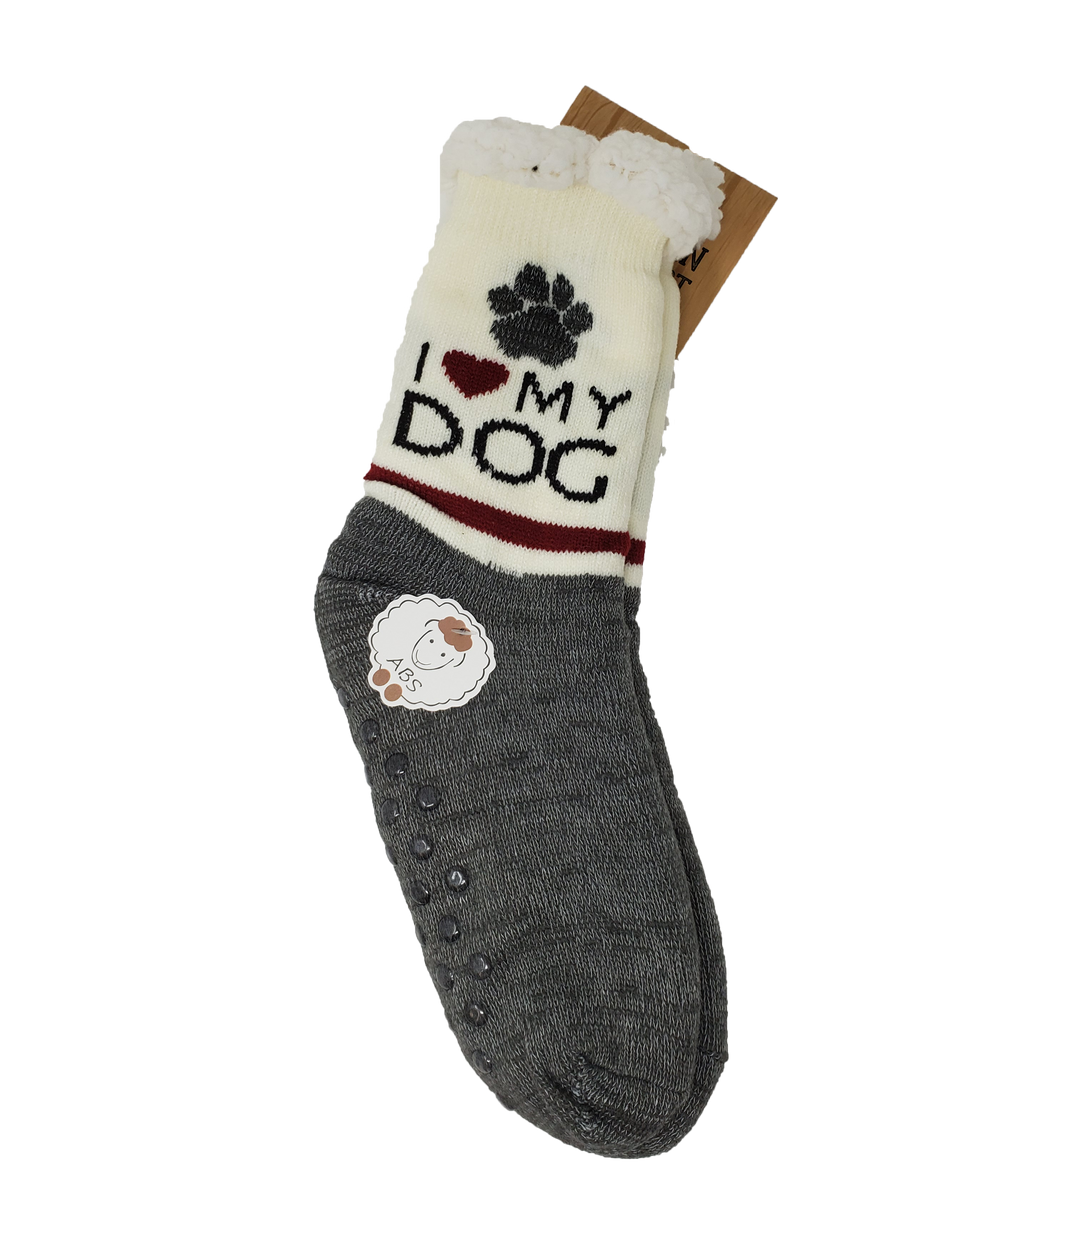 Northern Comfort I Love My Dog Sherpa-Lined Grip Women and Men's Sli –  Great Sox